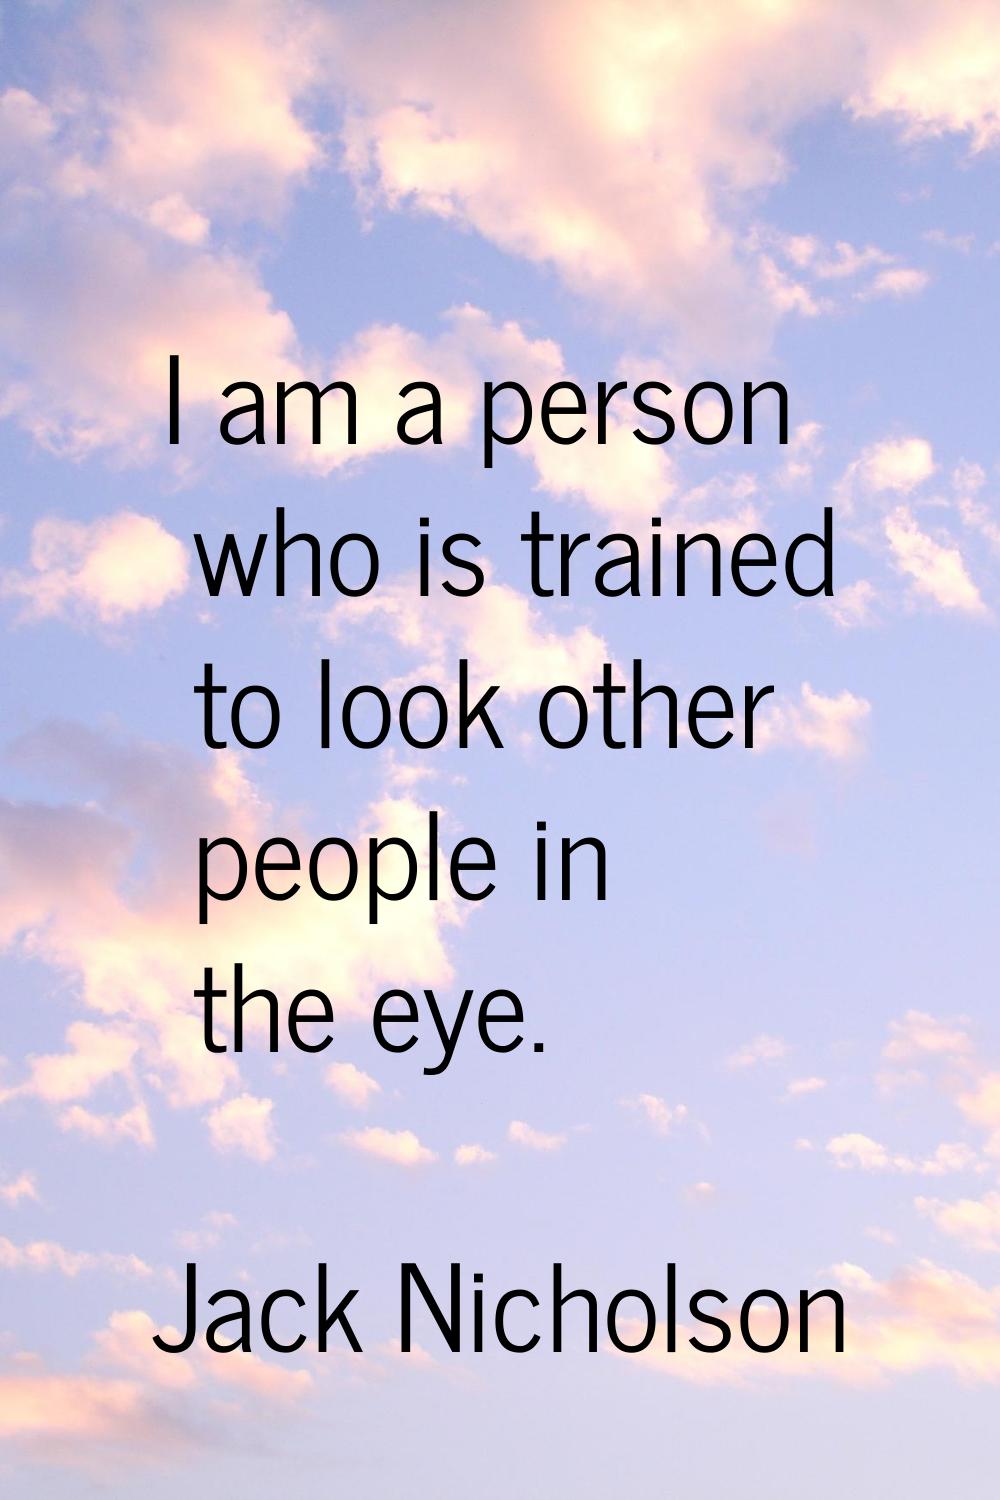 I am a person who is trained to look other people in the eye.